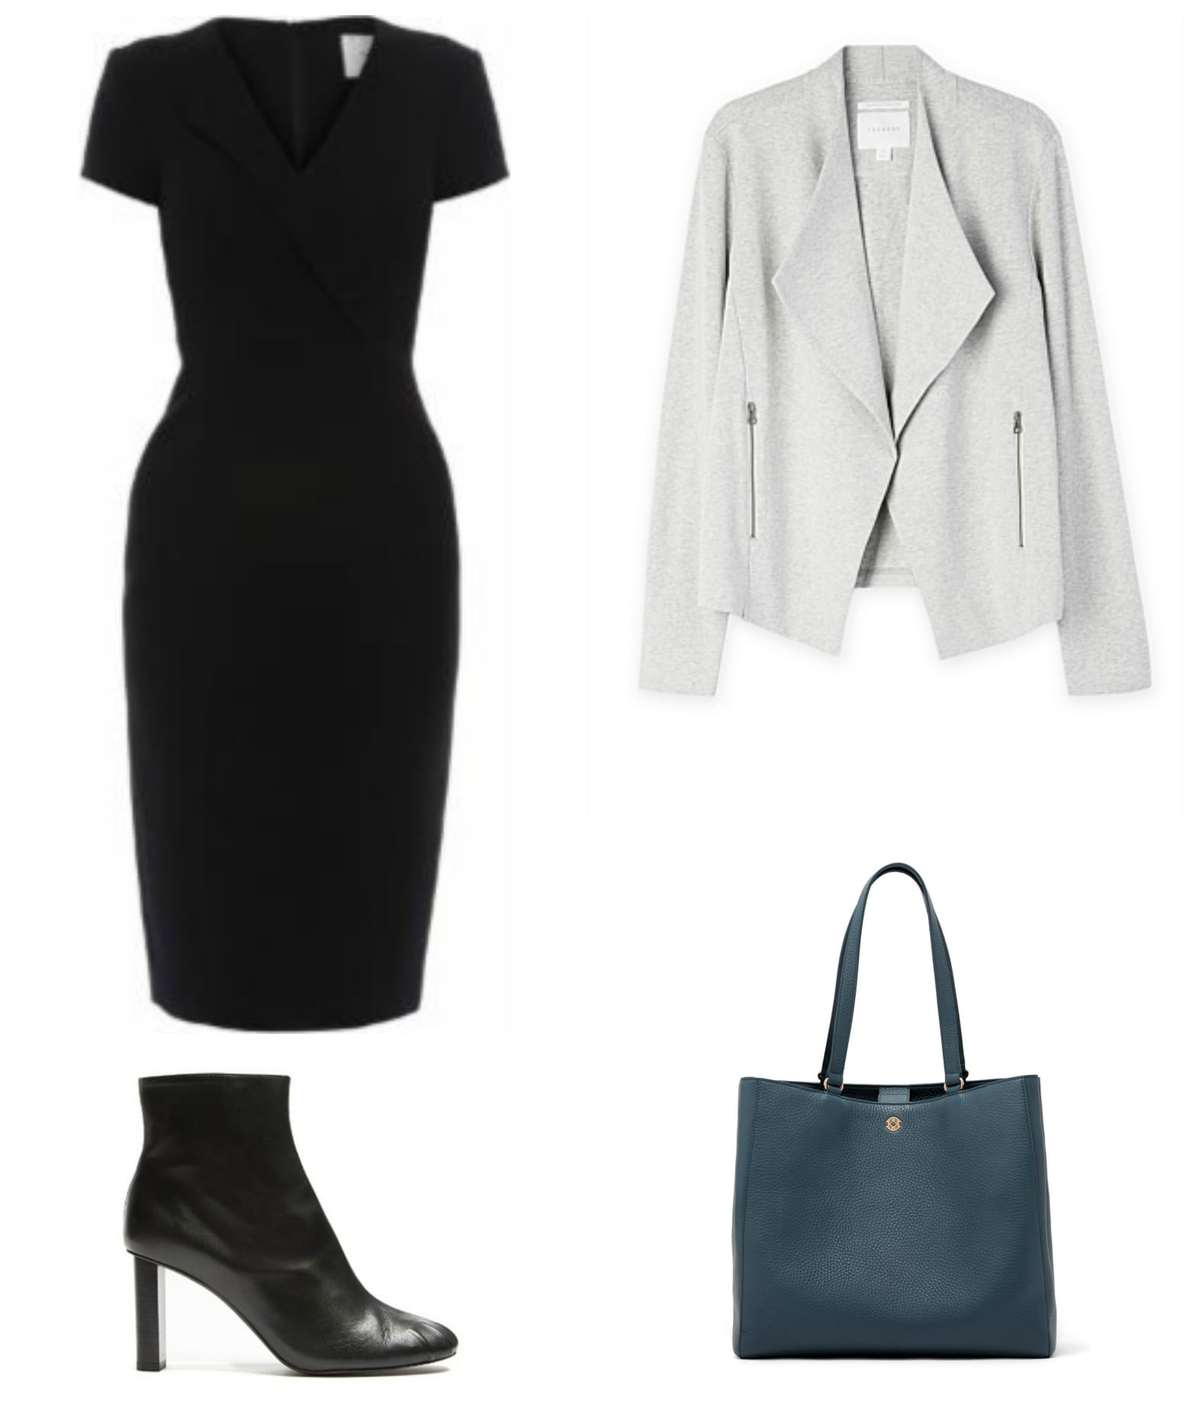 outfit39